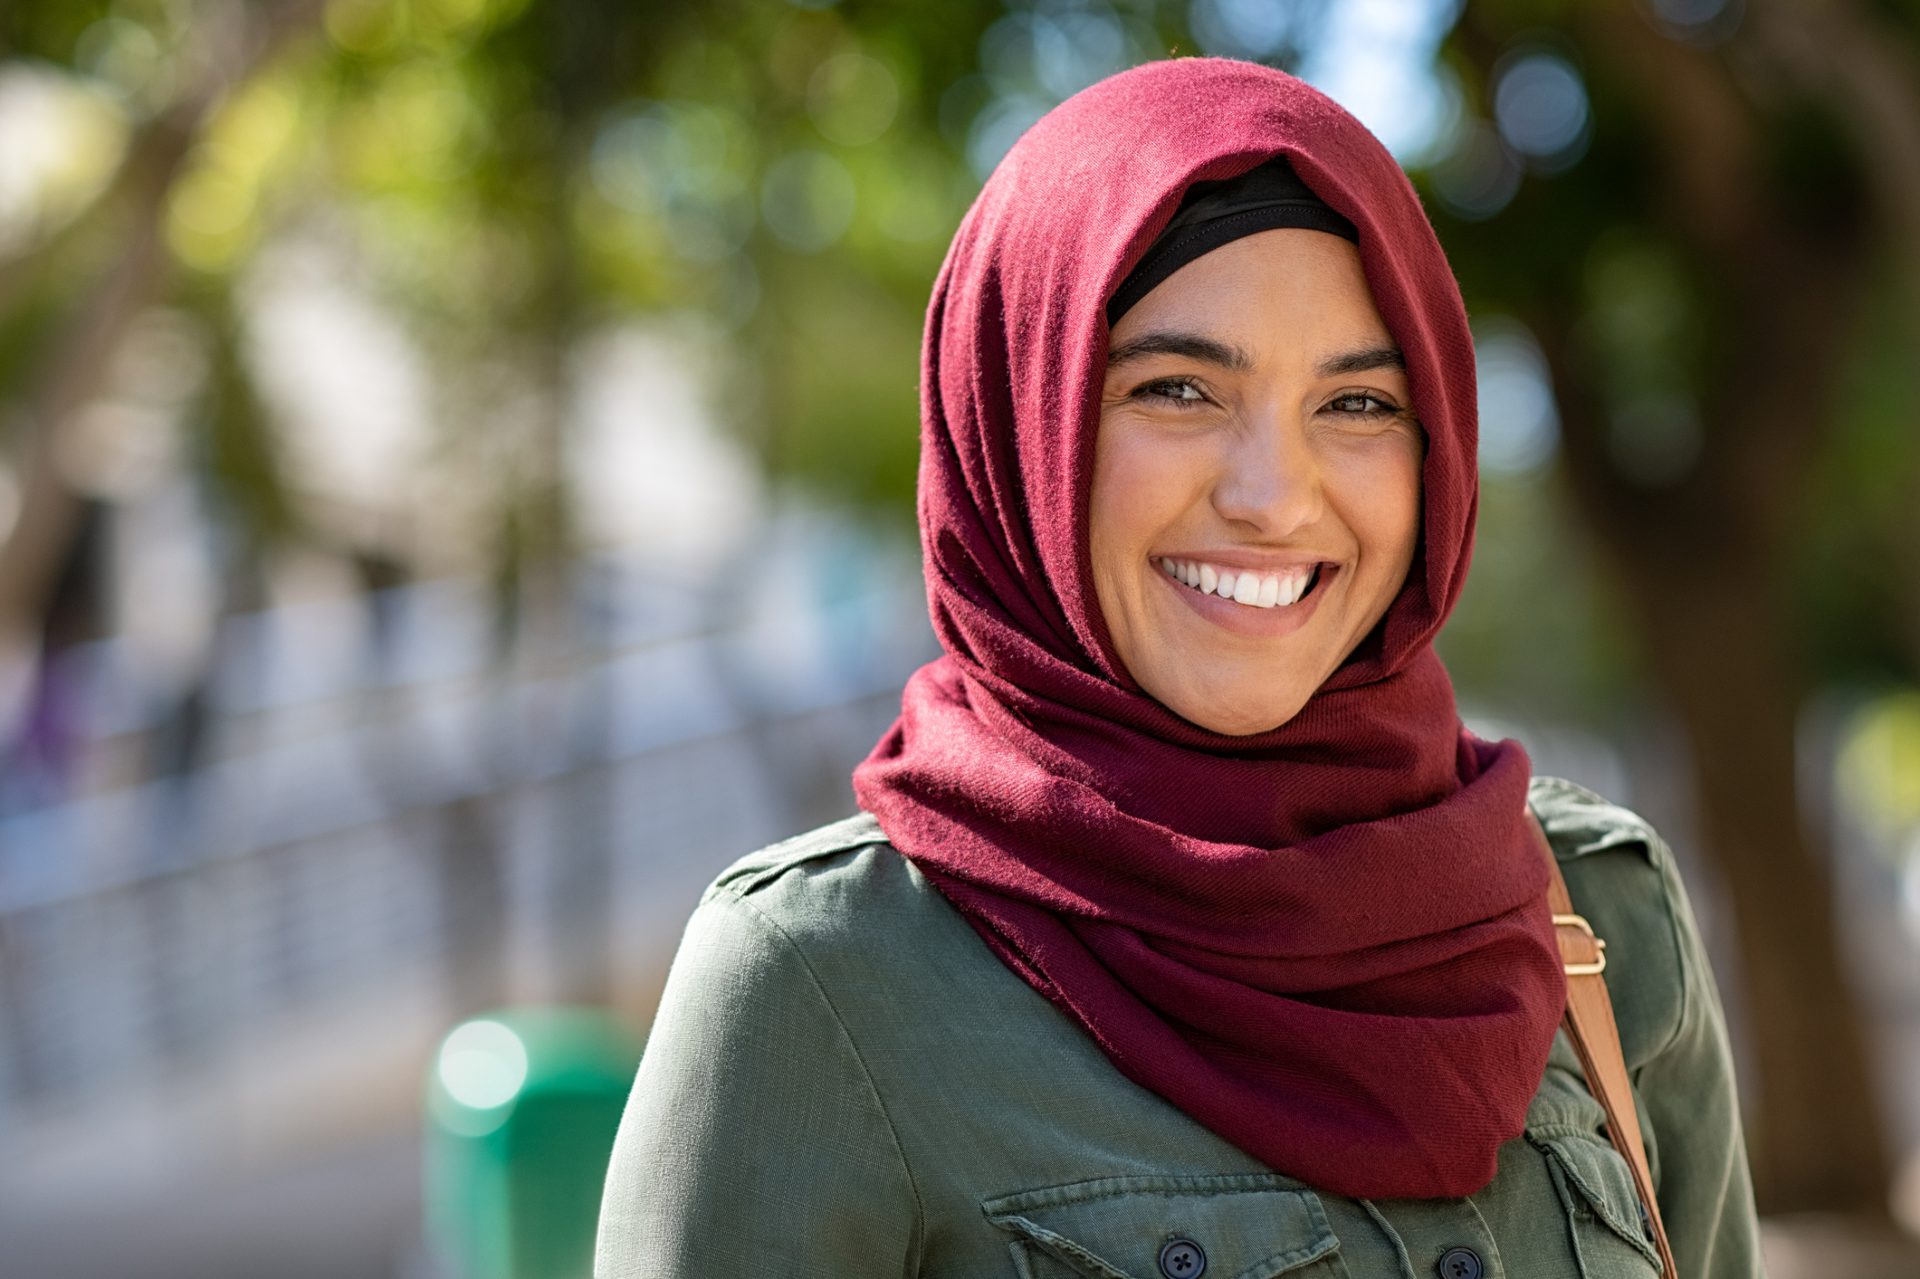 the photo shows a woman wearing a red hijab with brown eyes standing outside a building and smiling straight at the camera